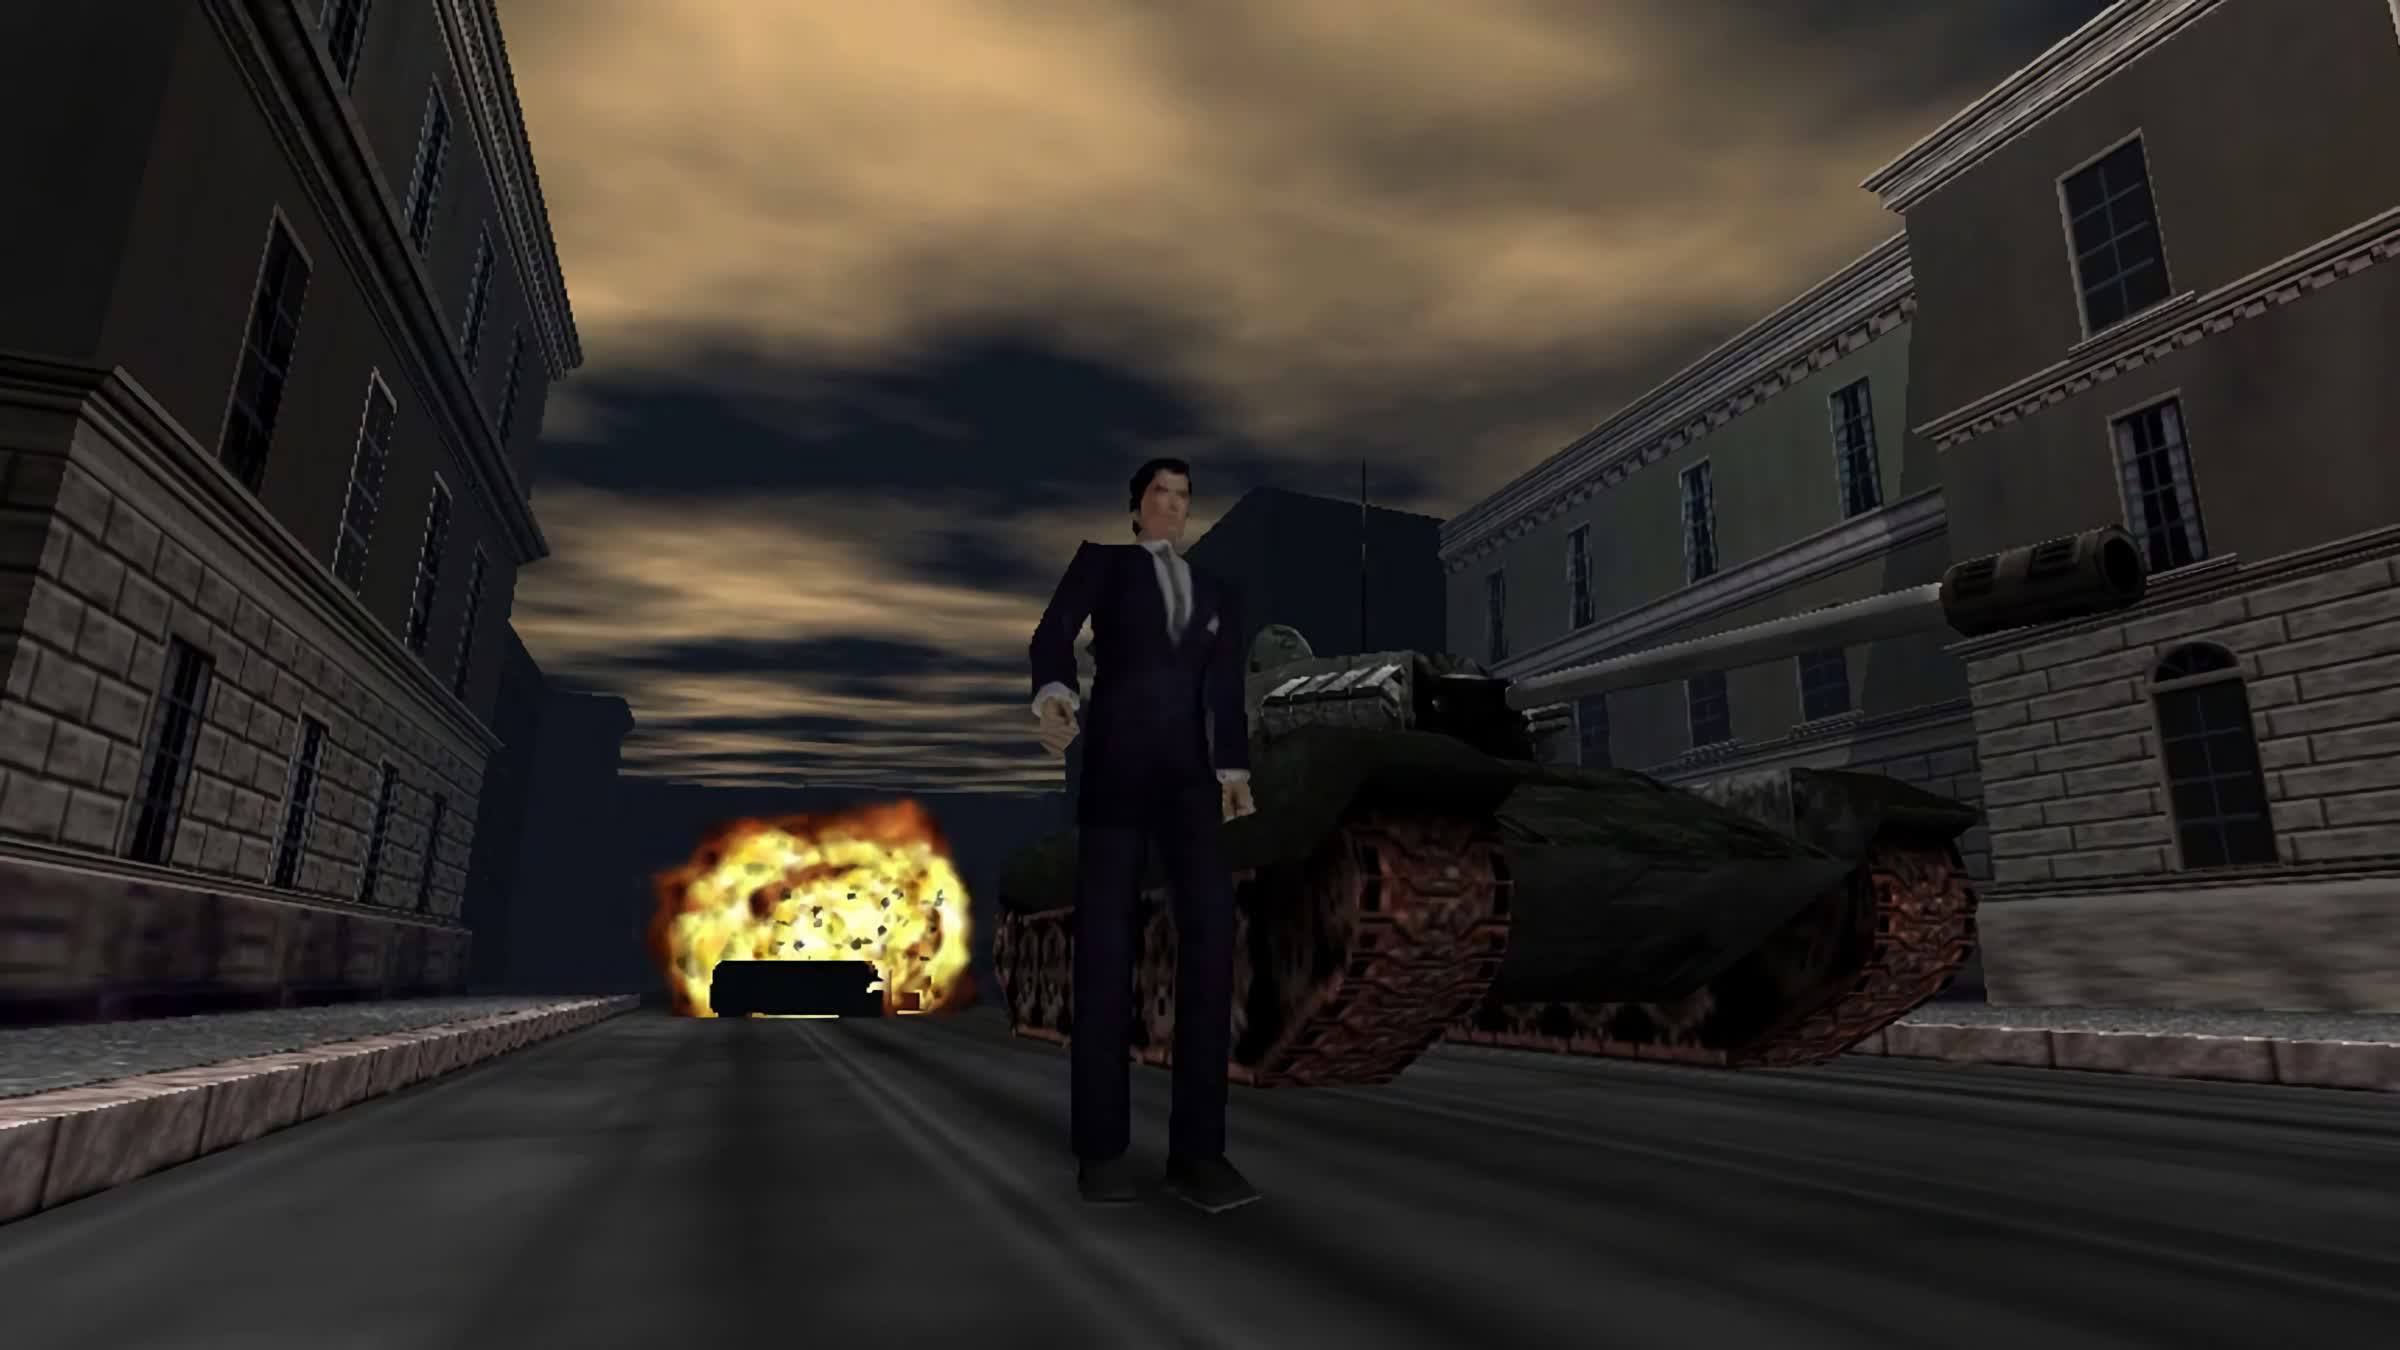 Relive the golden years of gaming this Friday when GoldenEye 007 makes its debut on the Nintendo Switch